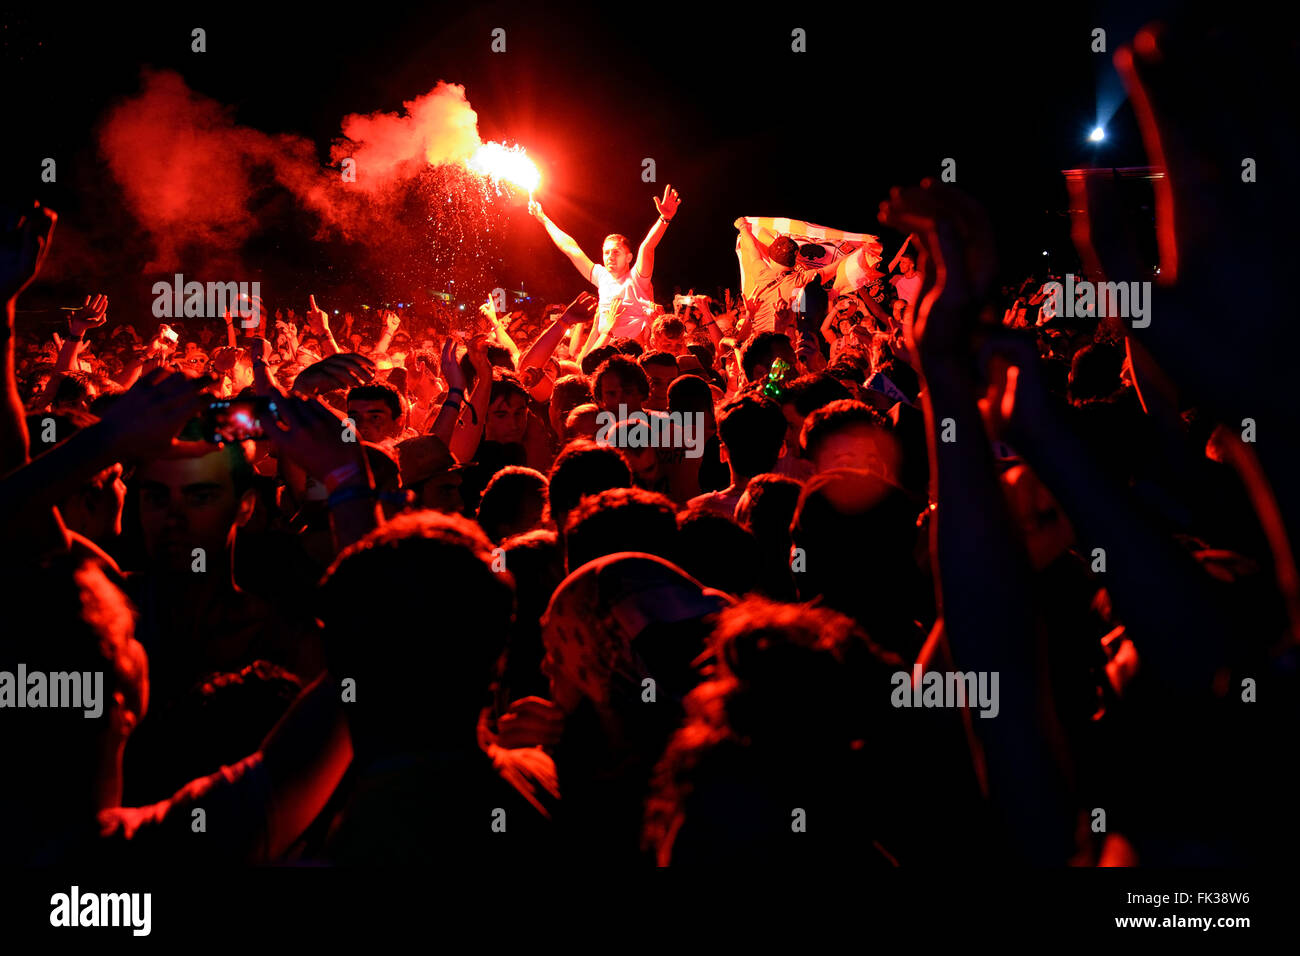 BENICASSIM, SPAIN - JULY 18: Man from the crowd with a burning flare at FIB Festival on July 18, 2014 in Benicassim, Spain. Stock Photo